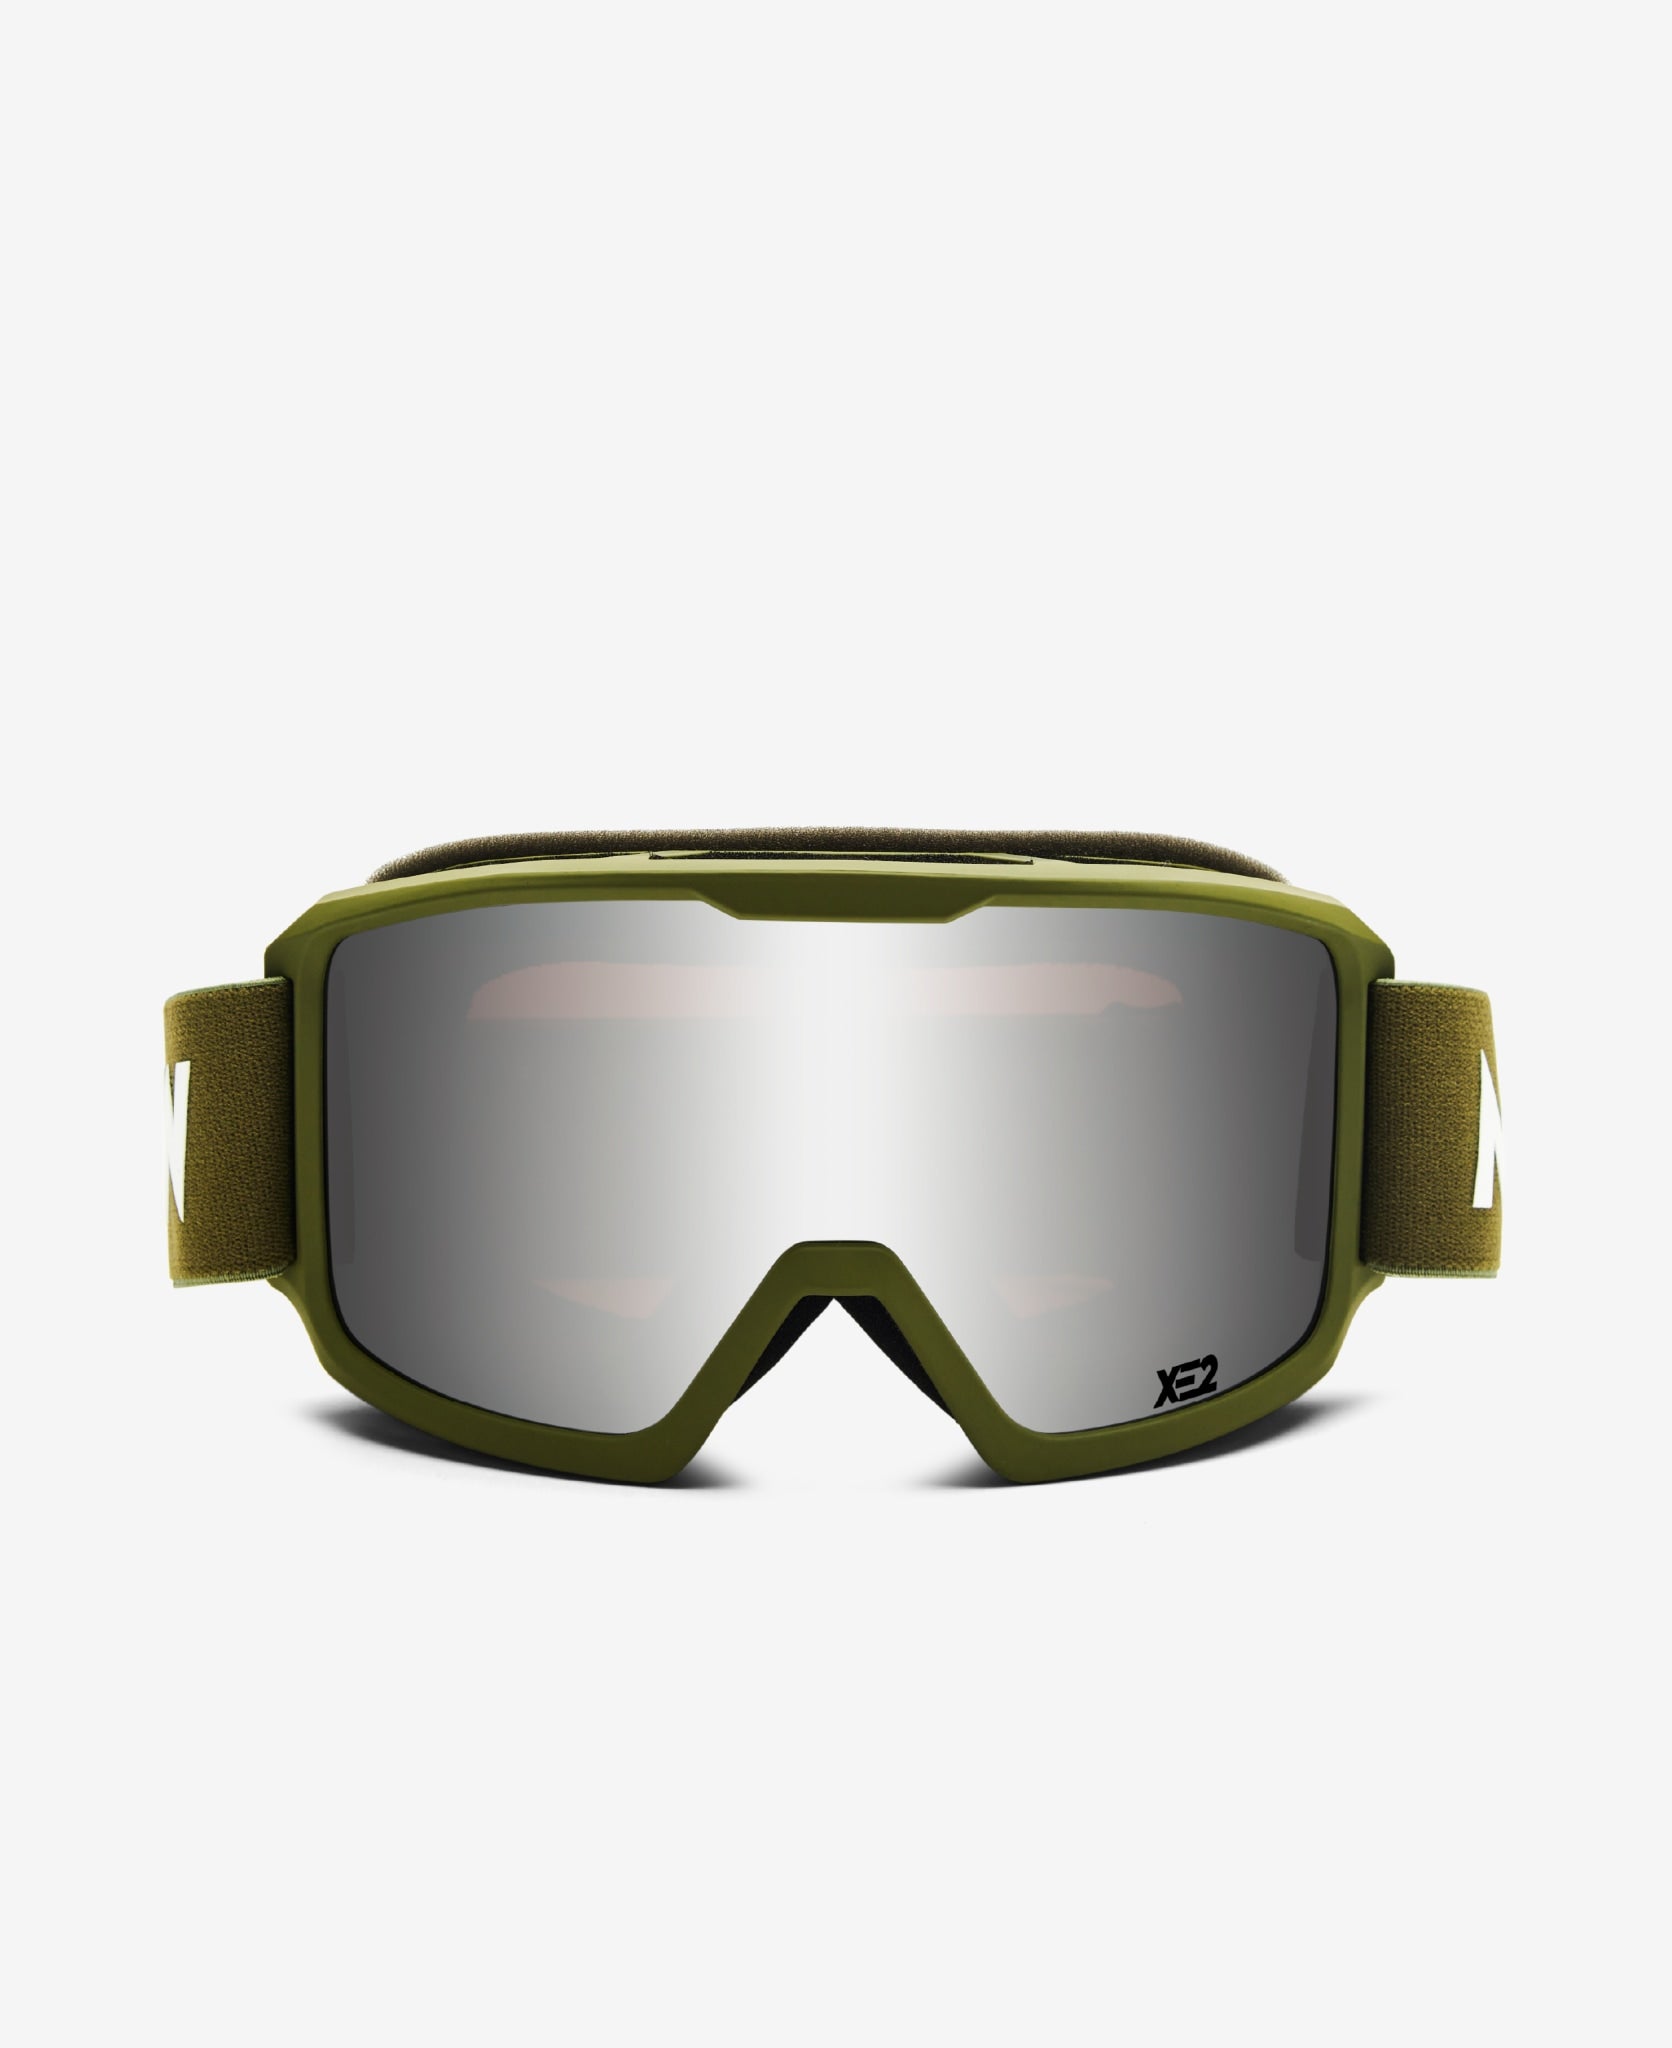 MessyWeekend - Snow Goggles | High Contrast, Magnetic & Photochromic